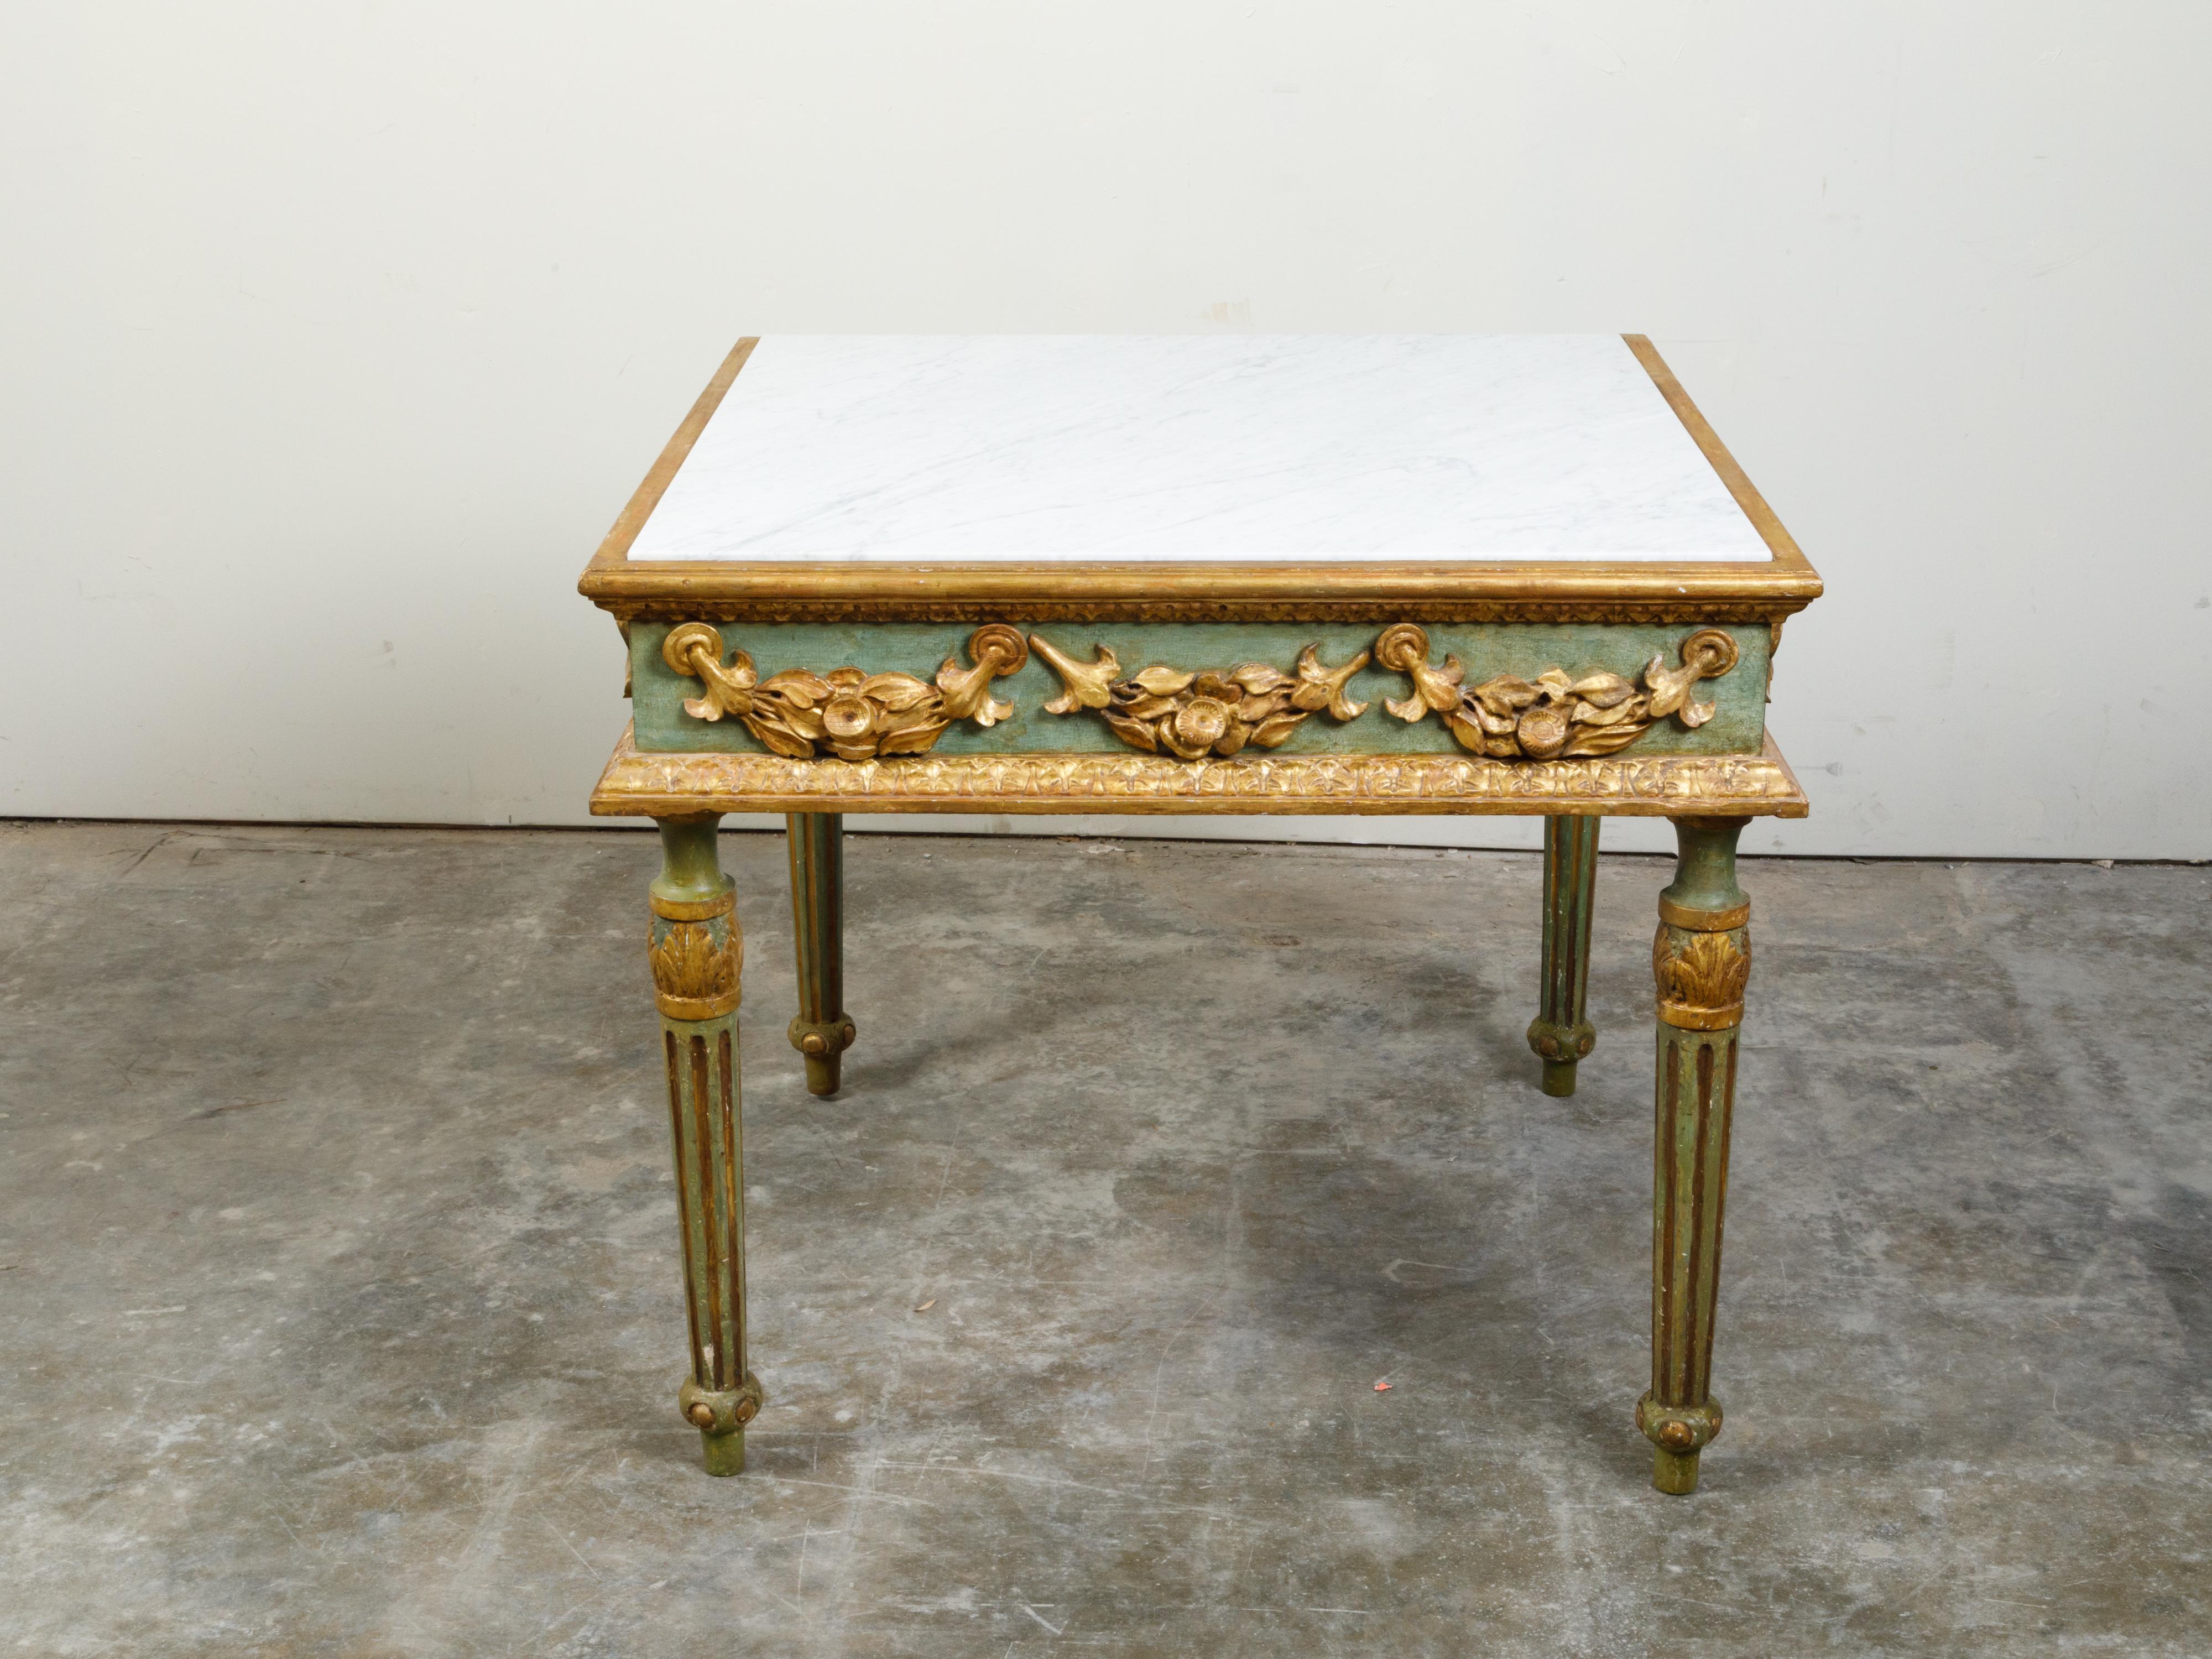 Wood Italian Neoclassical Period 18th Century Center Table with Carved Gilt Garlands For Sale